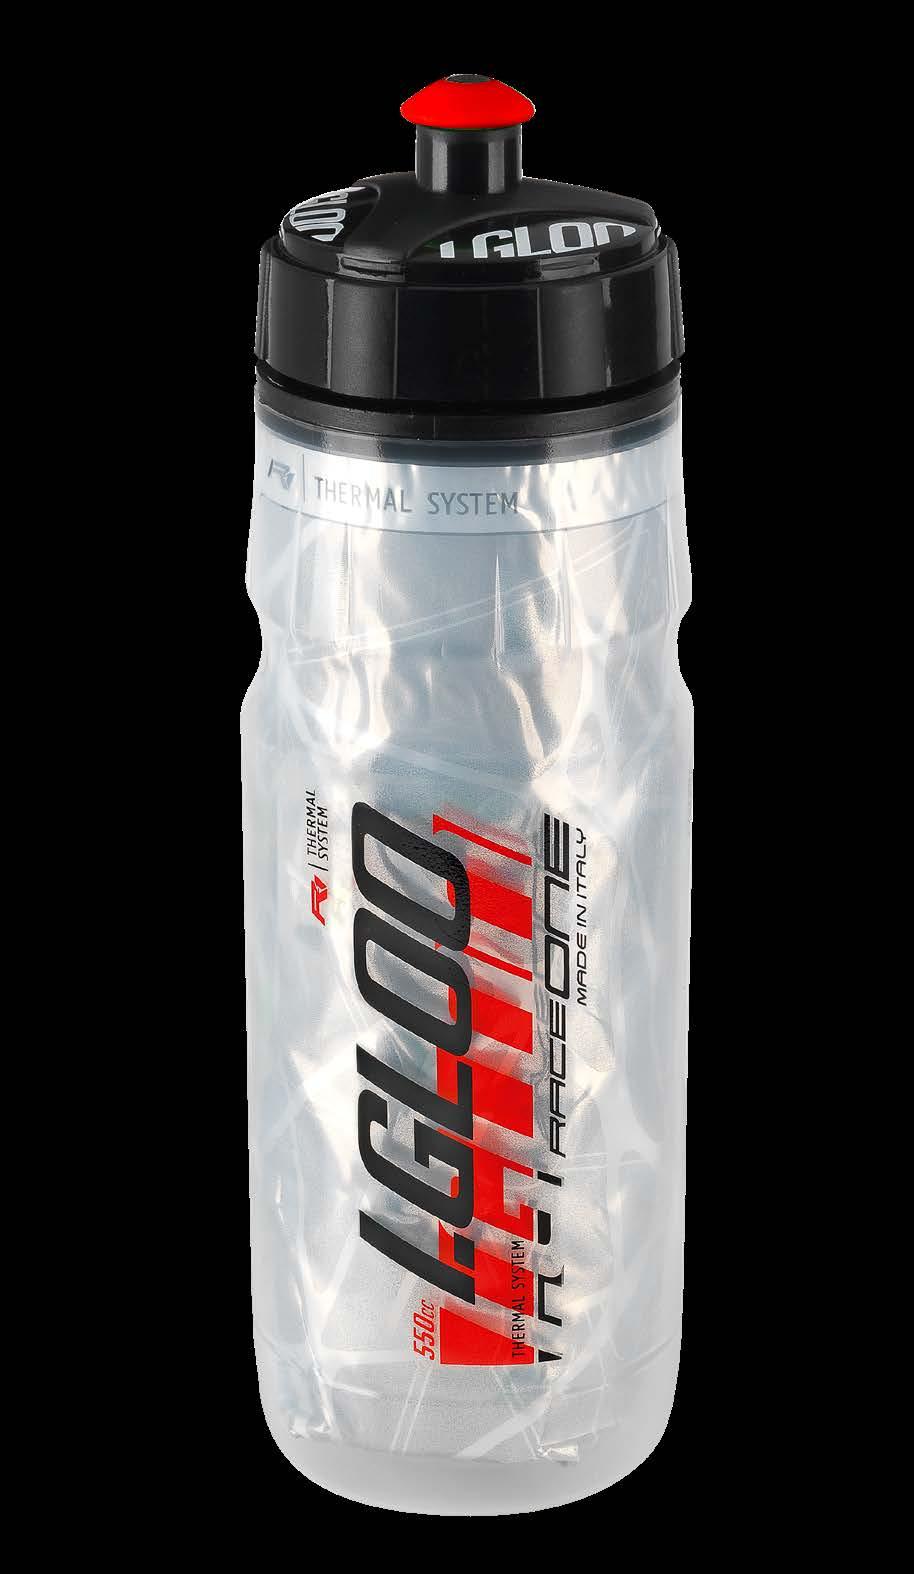 . 550cc of fresh energy and hydration composed by a double-wall system with reflective gap. The new thermal bottle I.